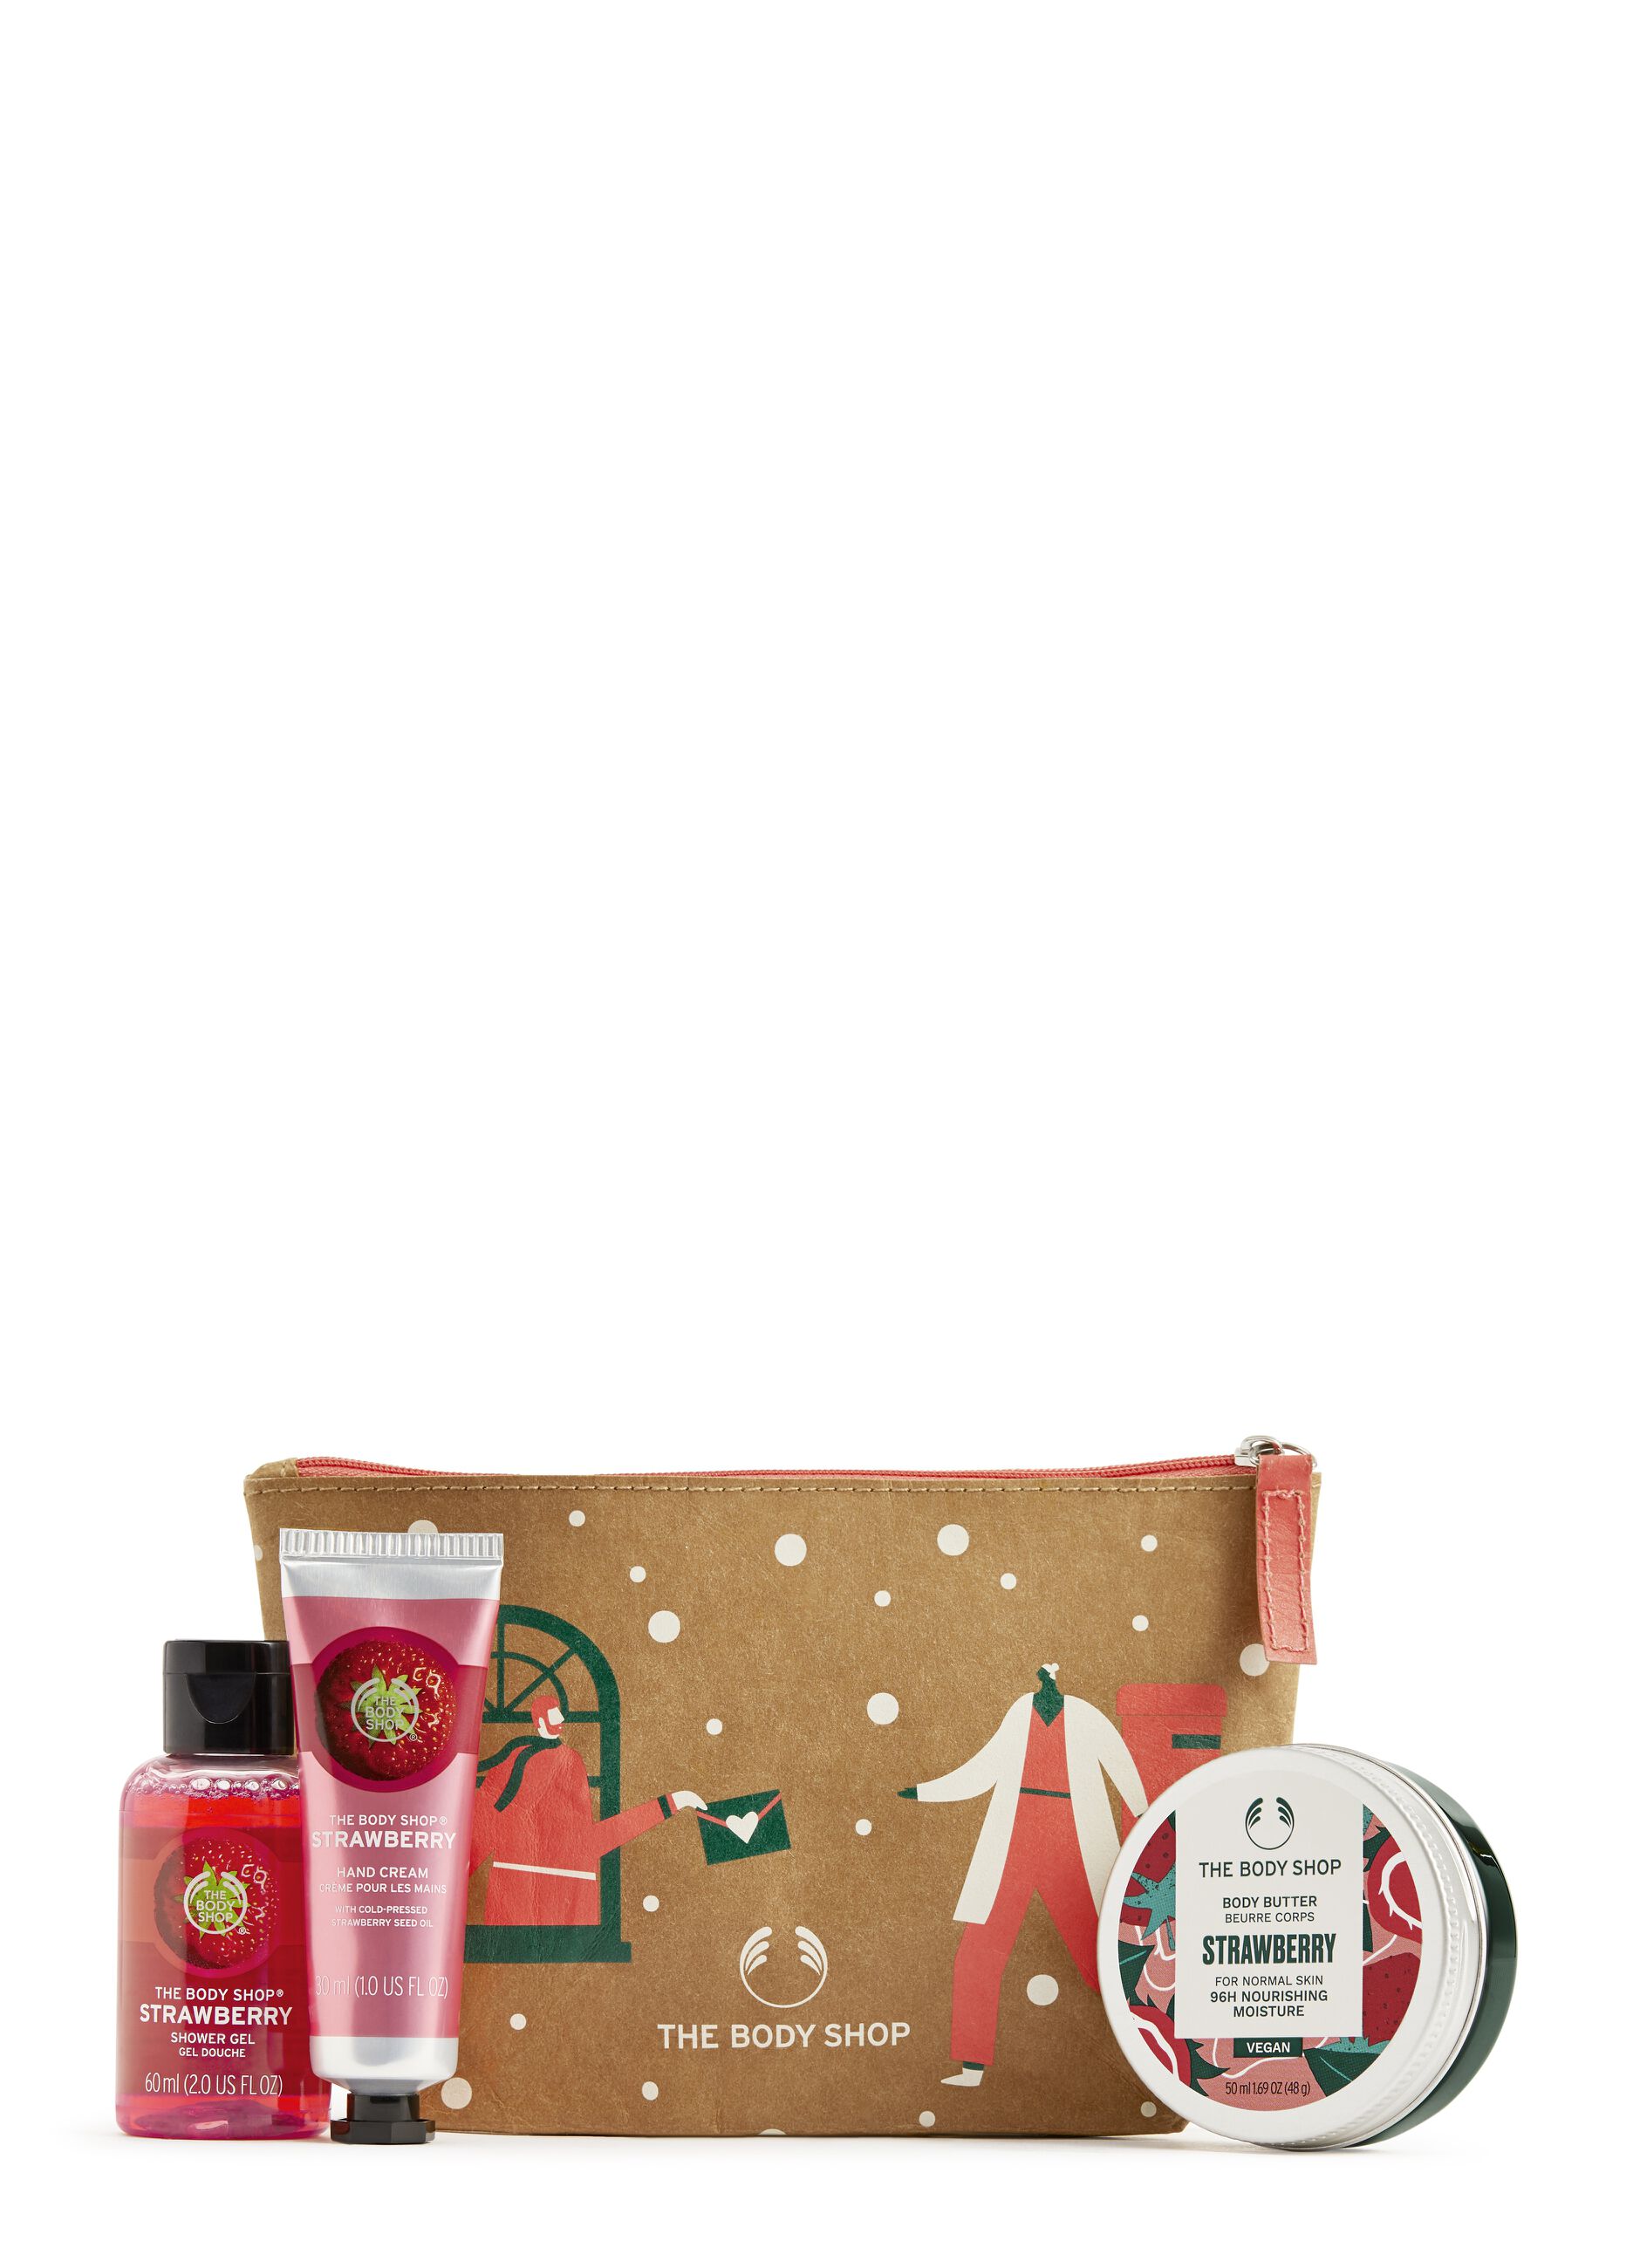 The Body Shop Jolly & Juicy strawberry gift bag